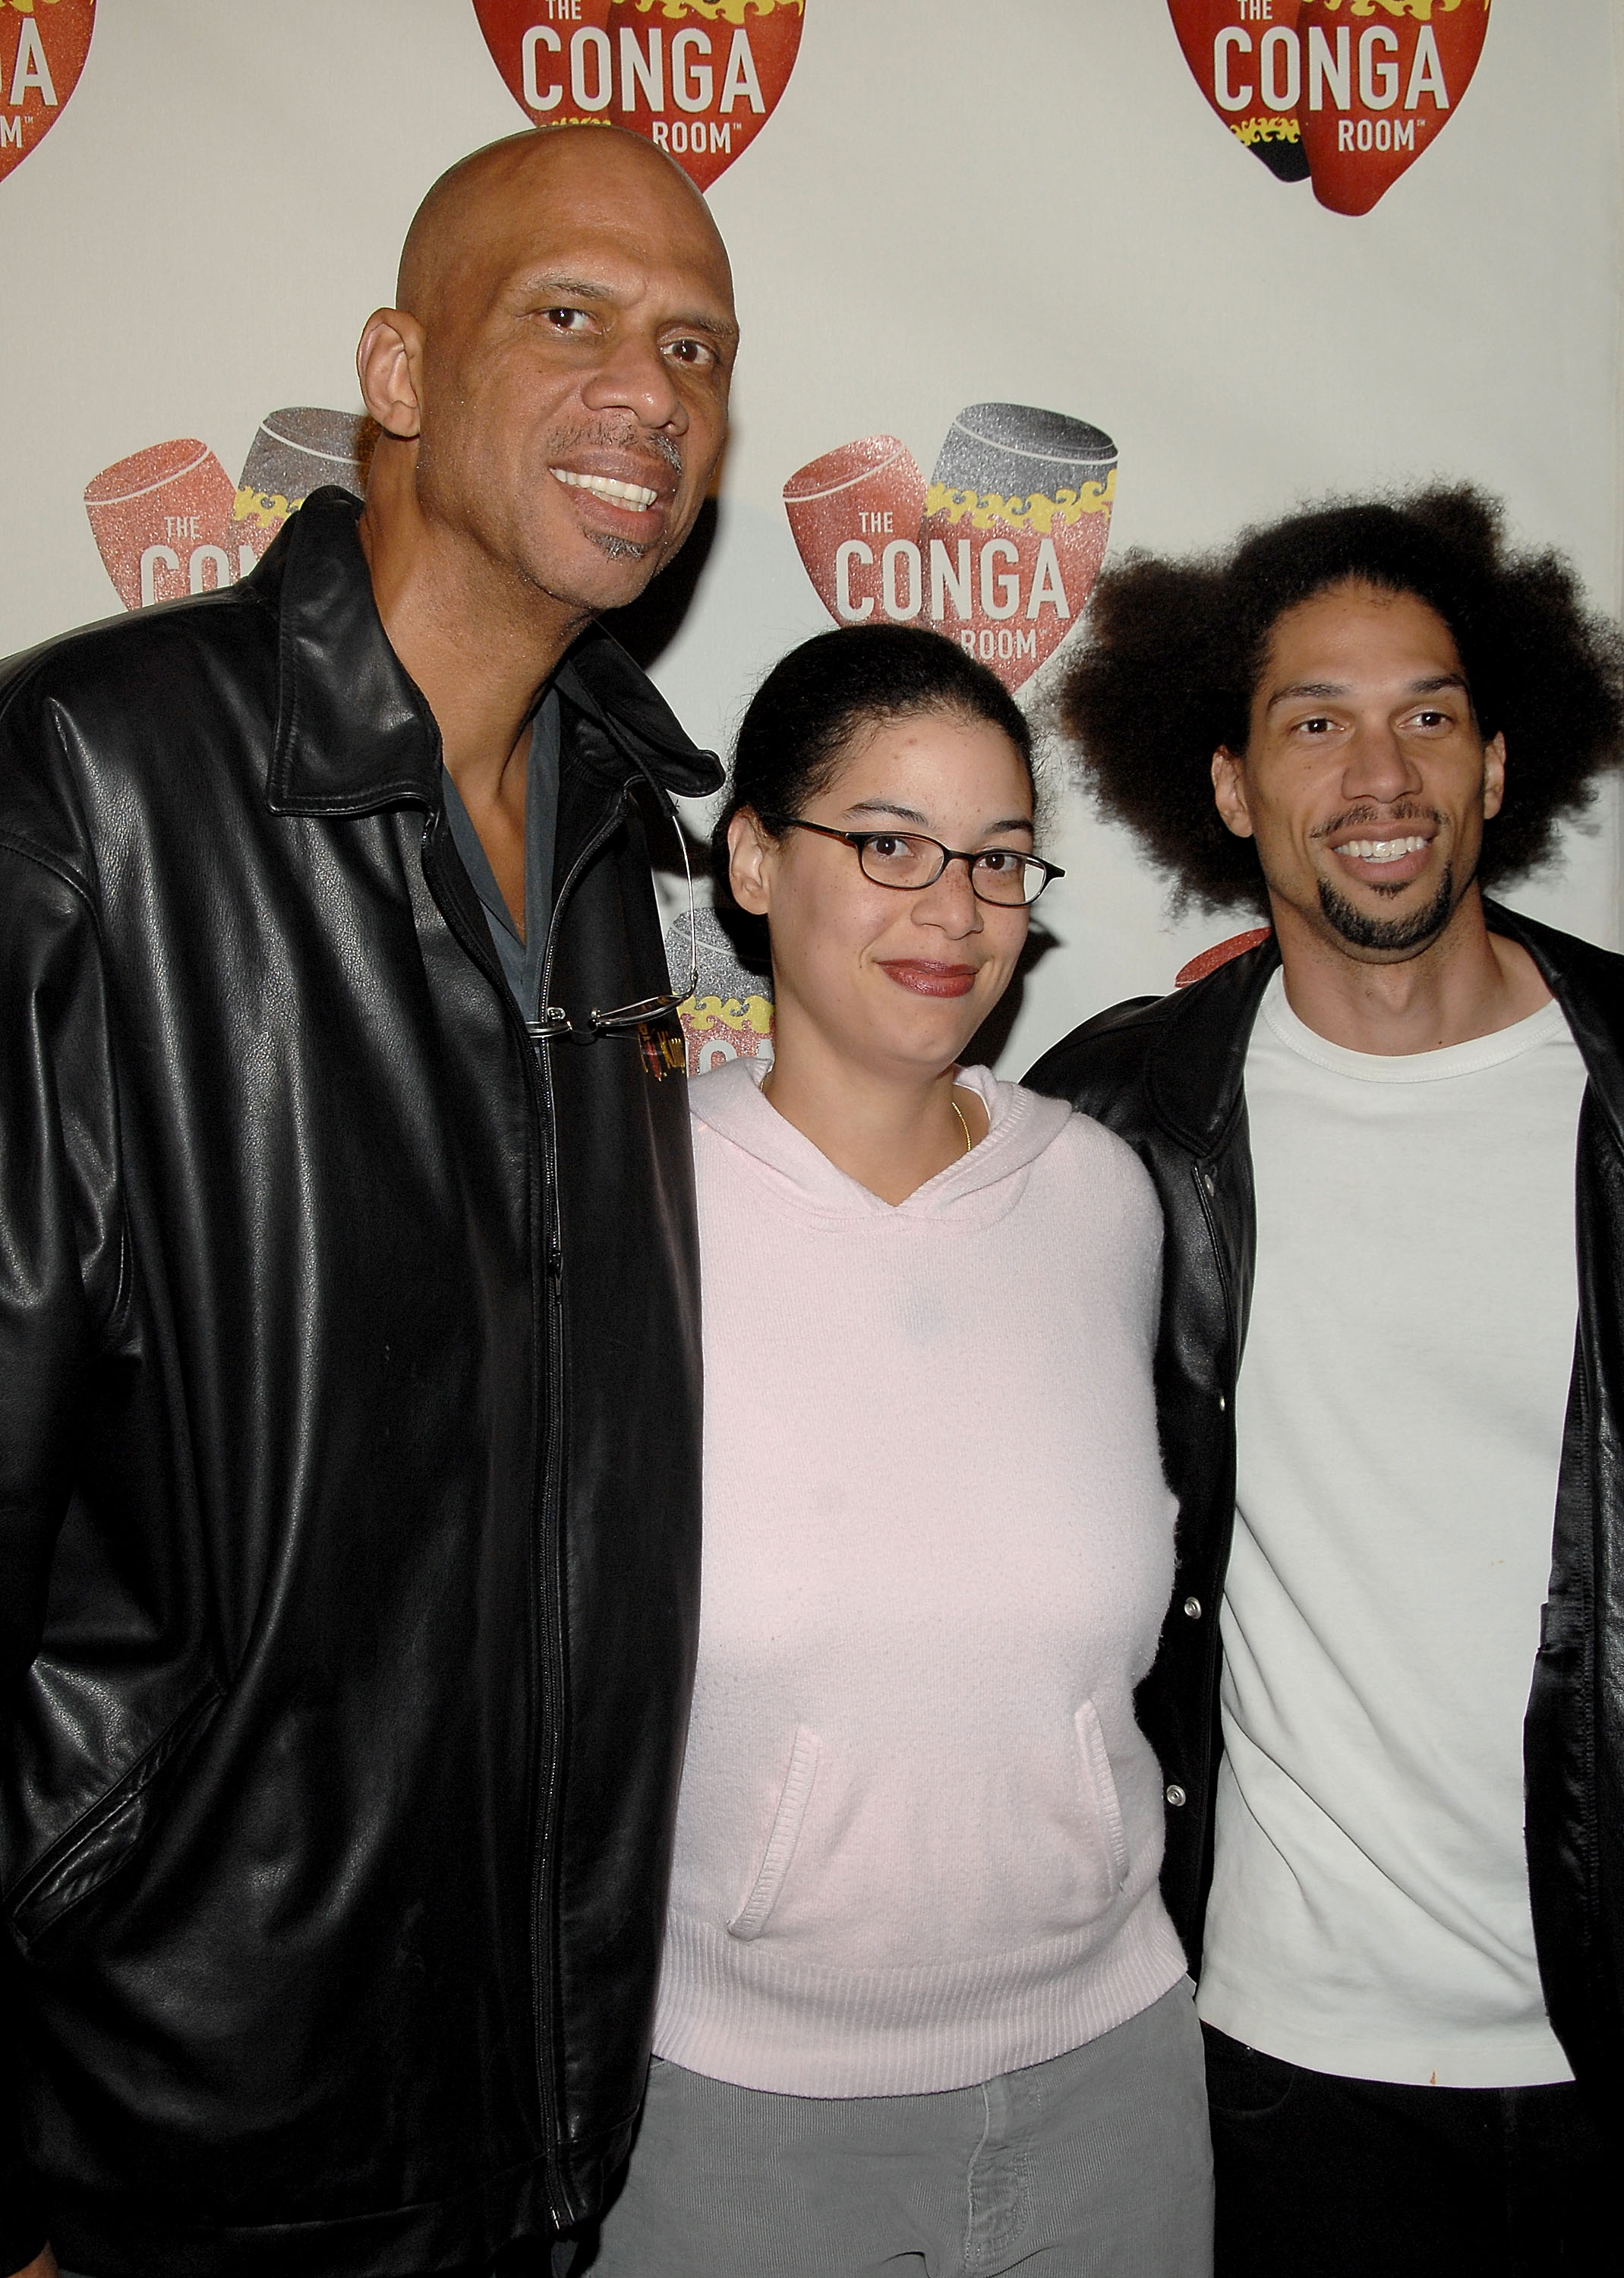 Kareem Abdul-Jabbar, Sultana Alcindor, and Kareem Abdul-Jabbar Jr. at the grand opening of the Conga Room on December 10, 2008, in Los Angeles, California. | Source: Getty Images